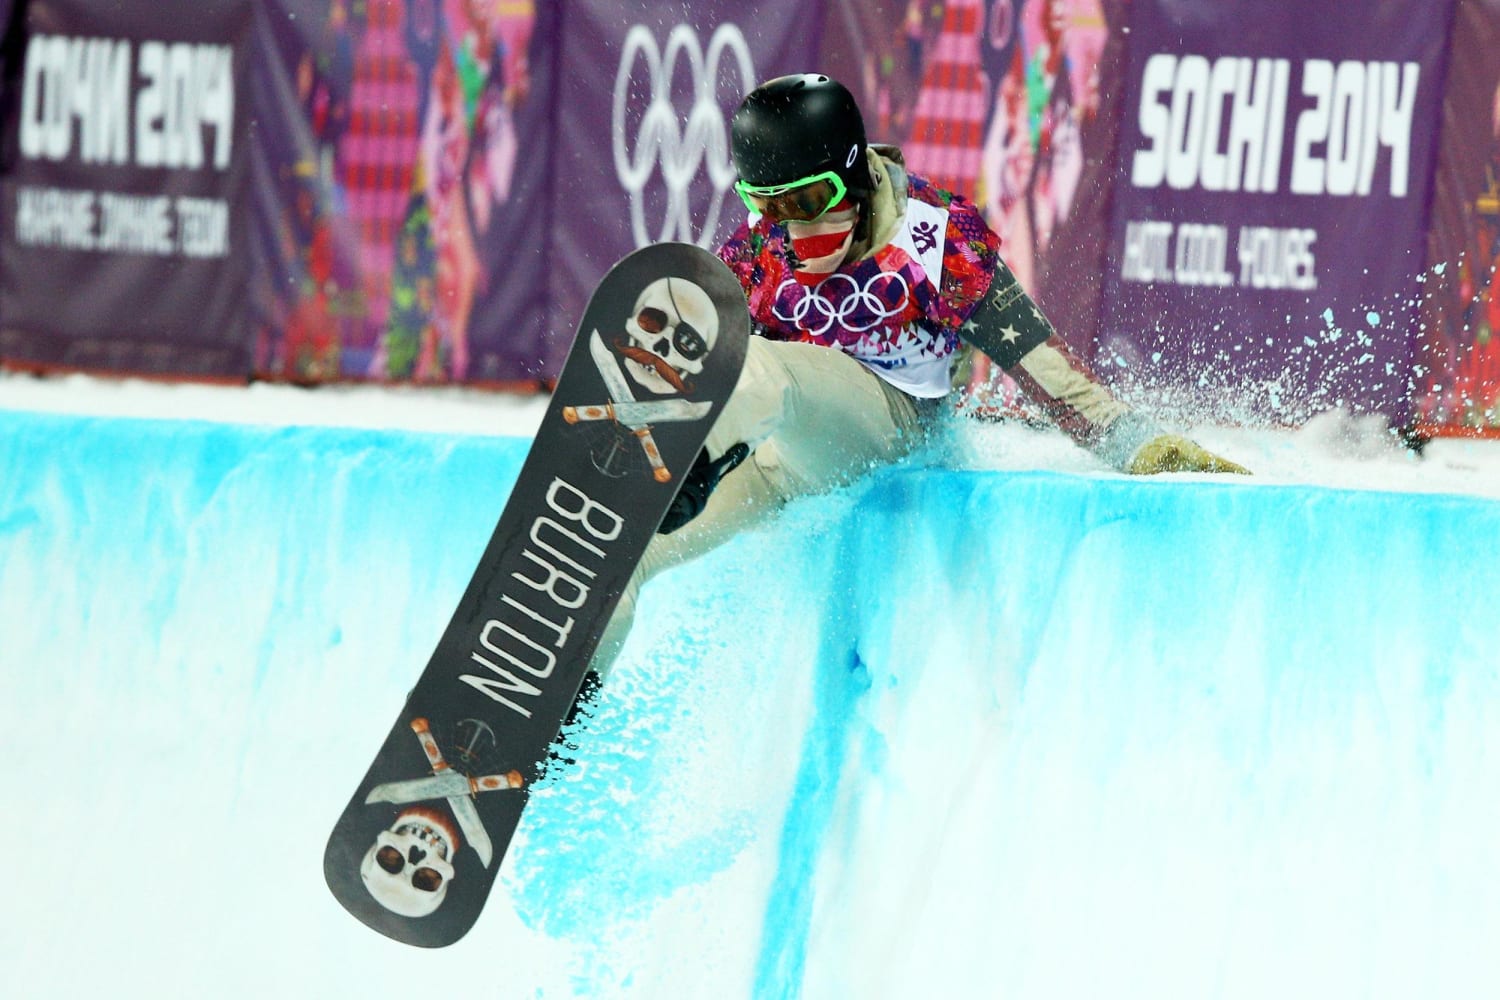 OLYMPICS] Shaun White Finishes Fourth in Snowboard Halfpipe